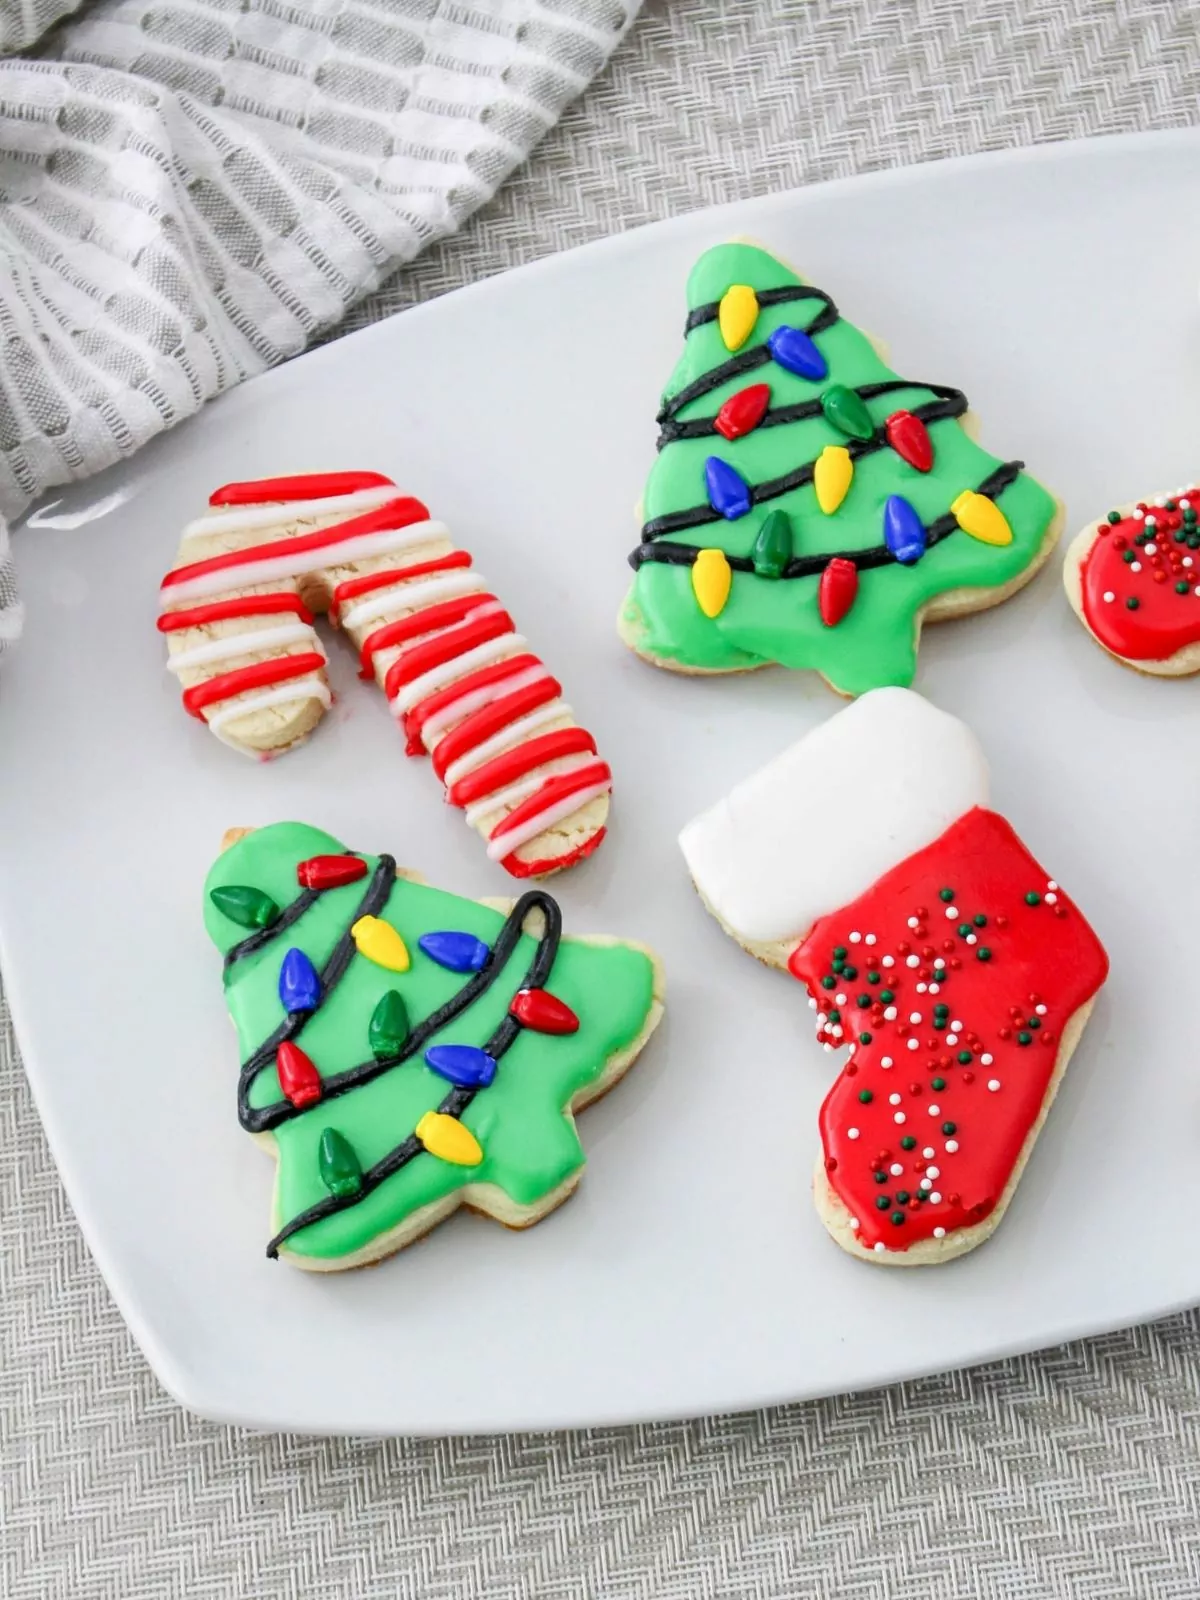 decorated Christmas cutout cookies on white plate.